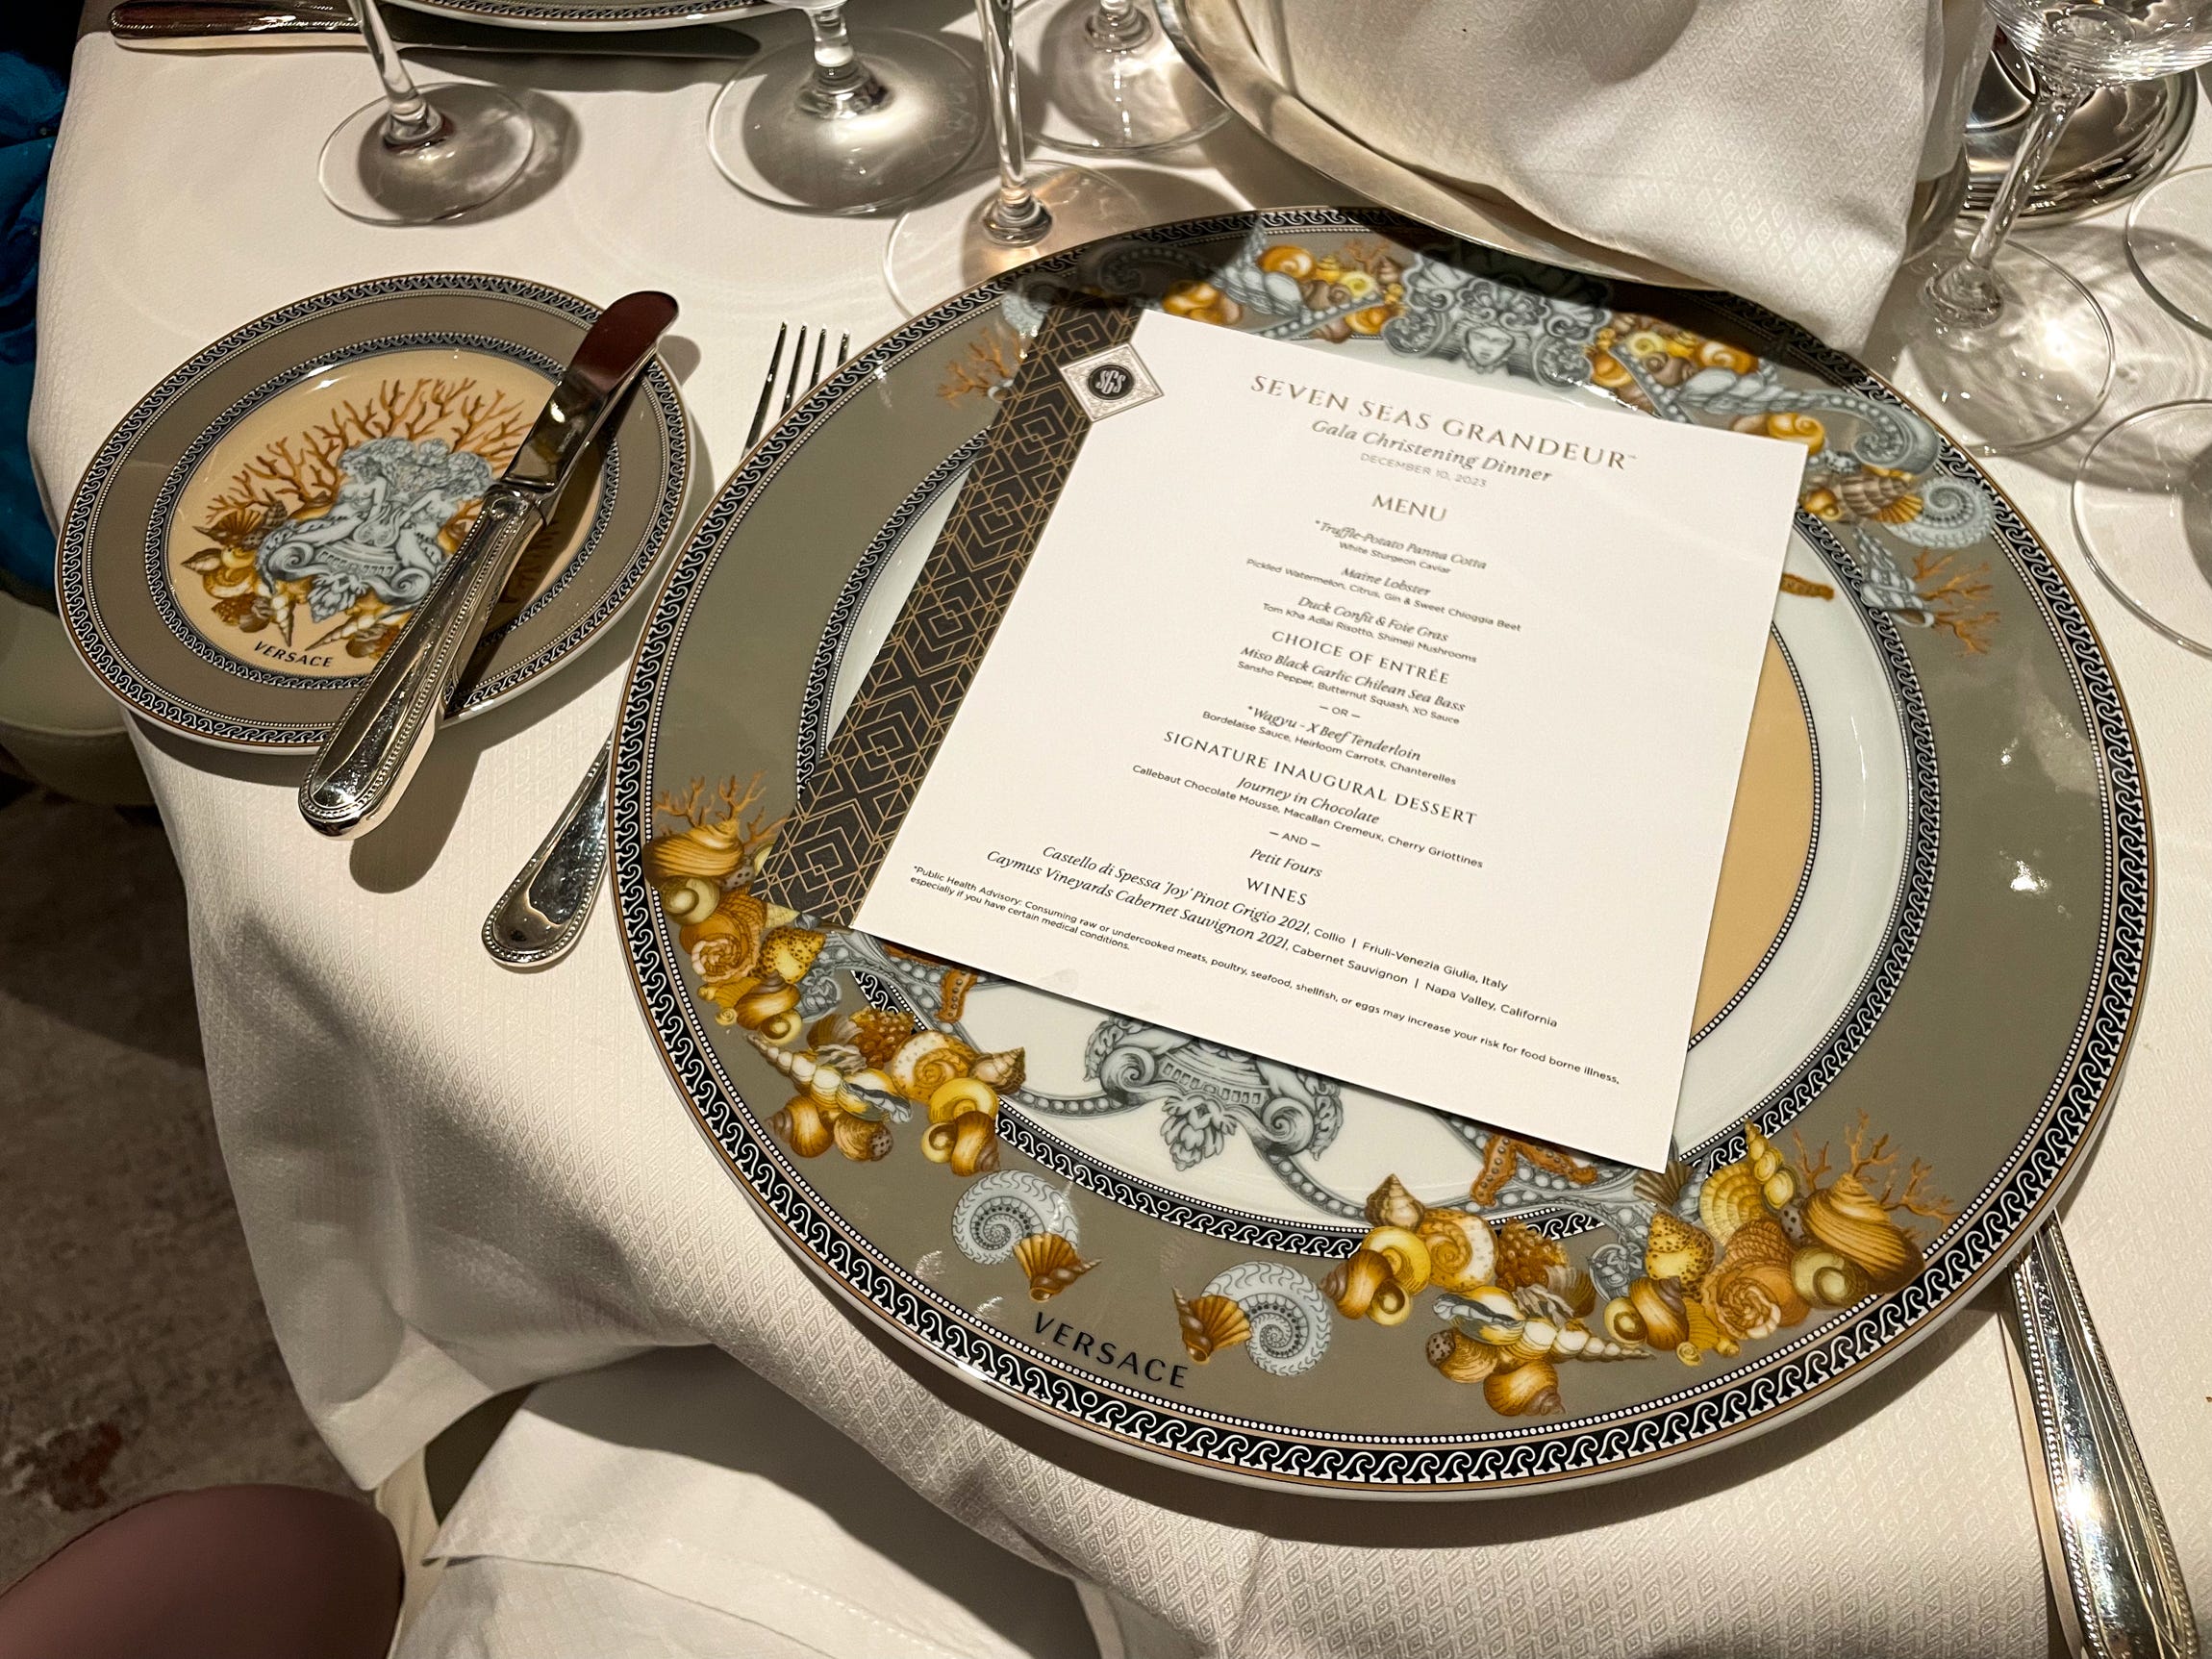 <p>It wouldn't be a luxury cruise without luxury products: Compass Rose's decorative and smaller bread and butter plates were made by Versace.</p>